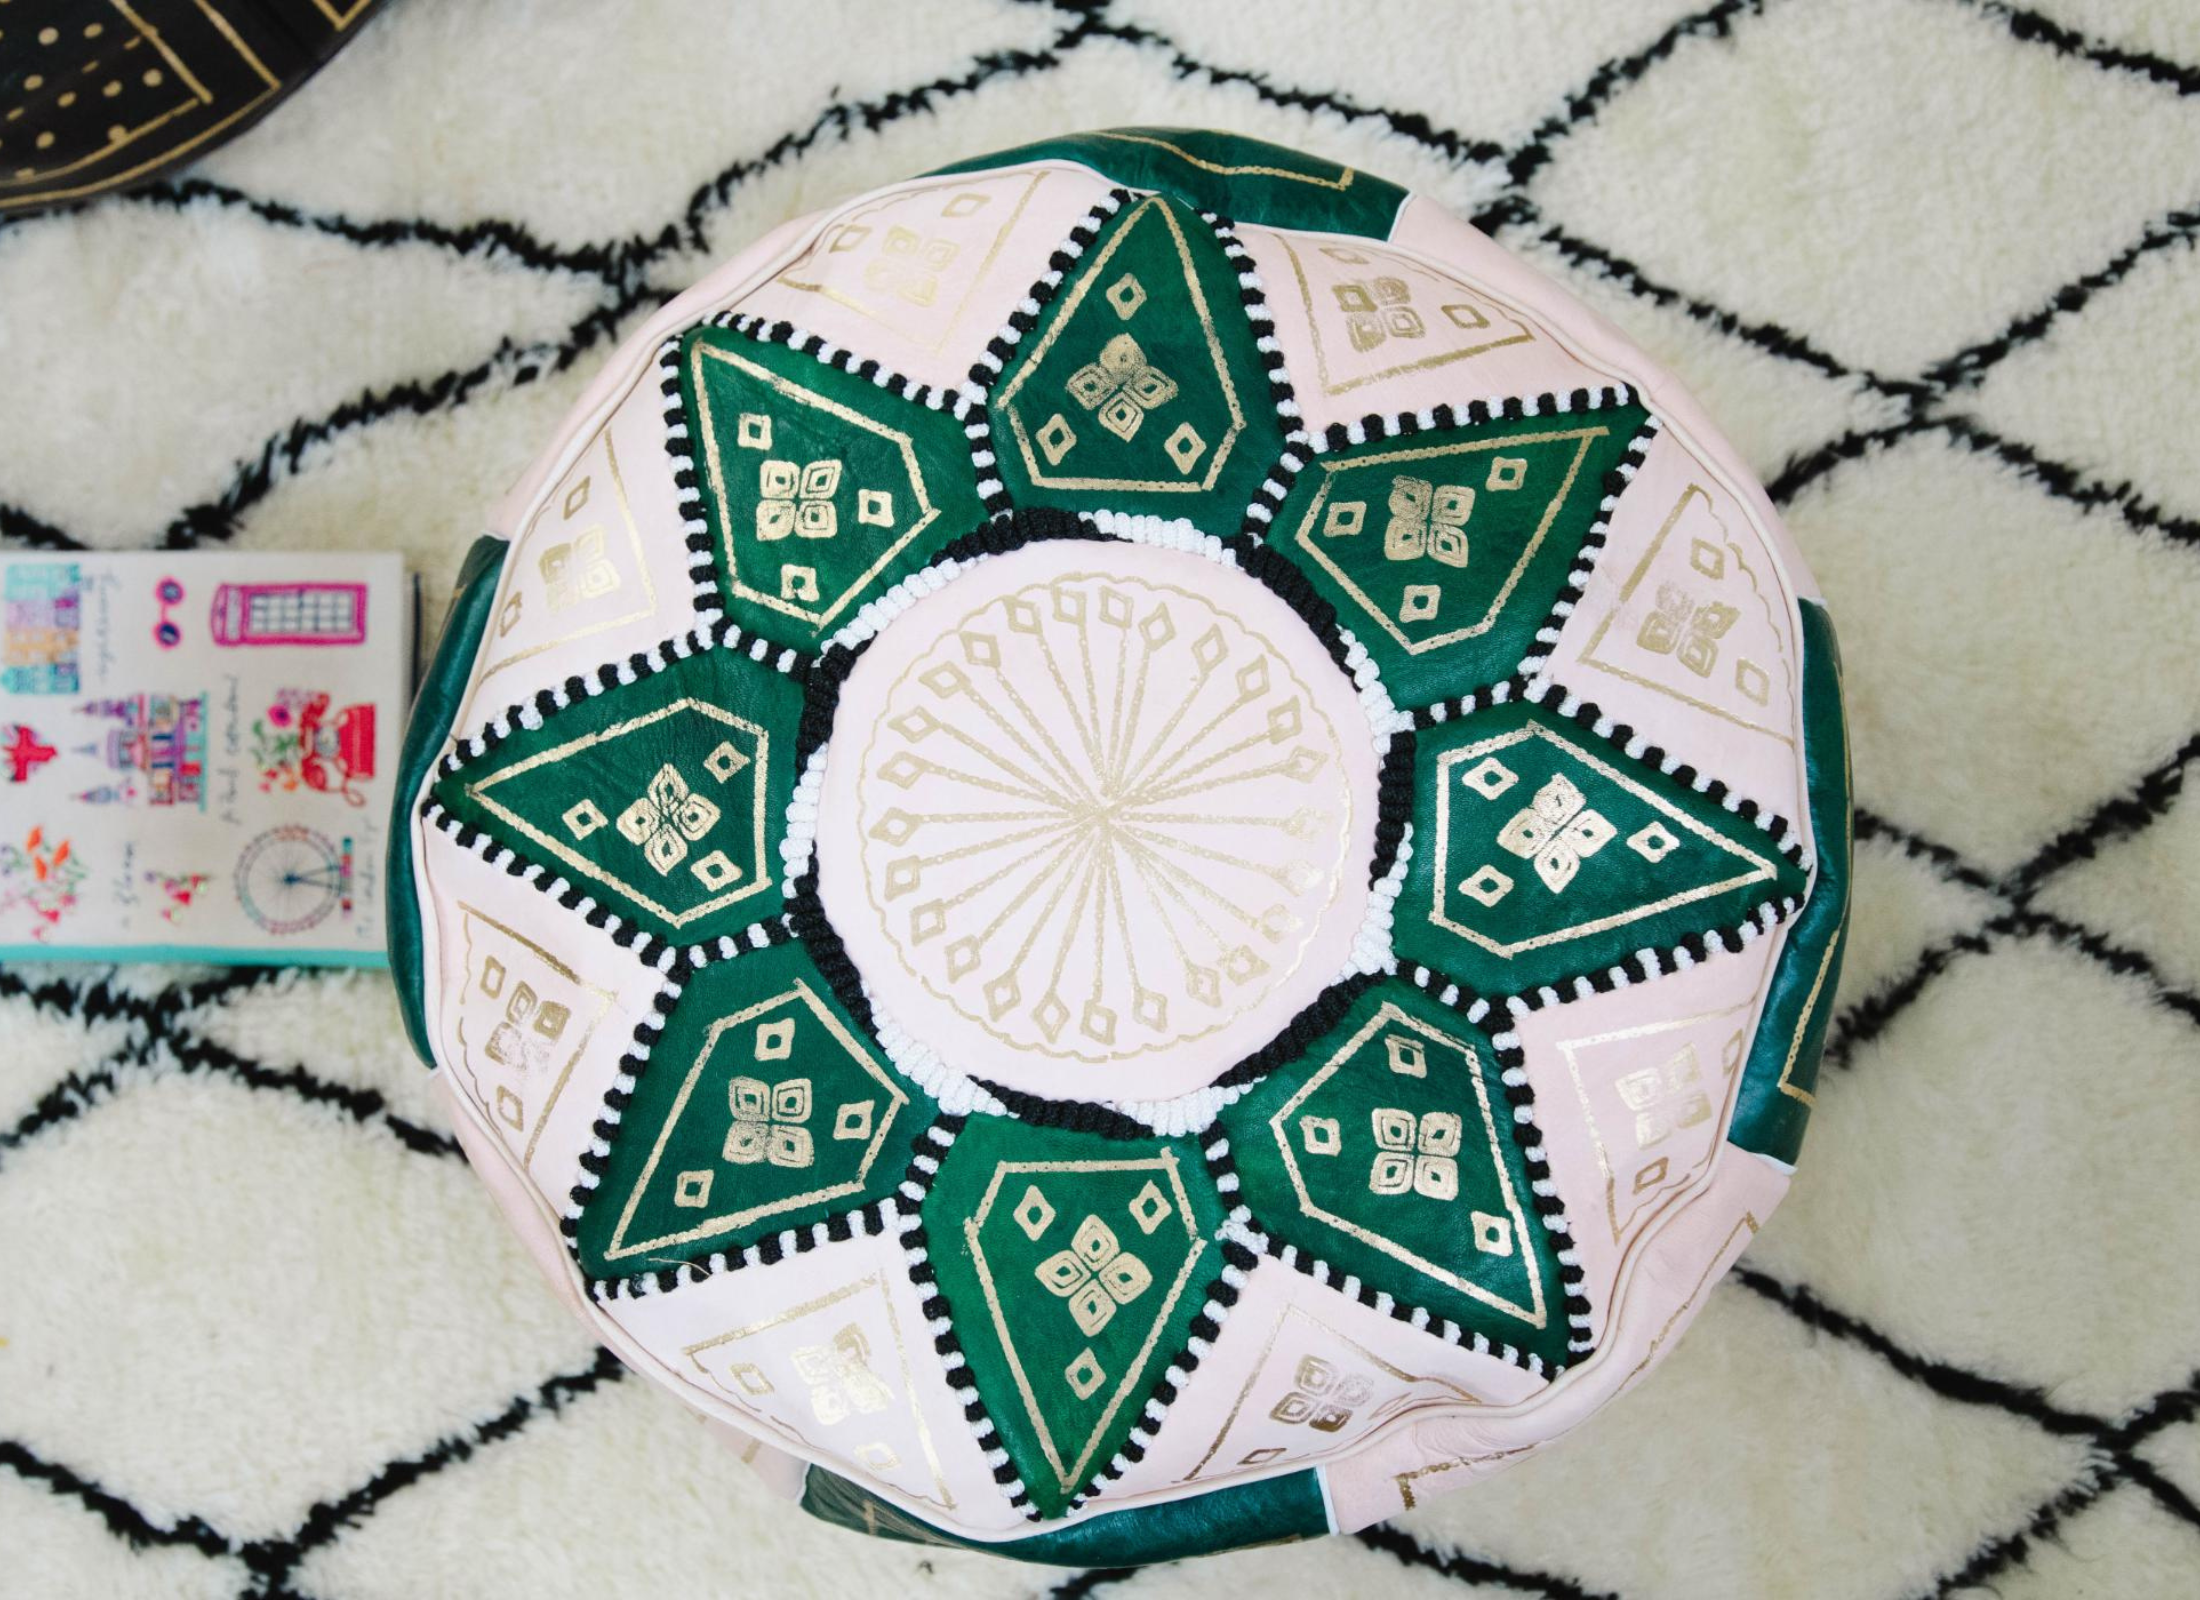 Moroccan Leather Pouf in Green & Gold - Leather Poufe Ottoman - Floor Poufs